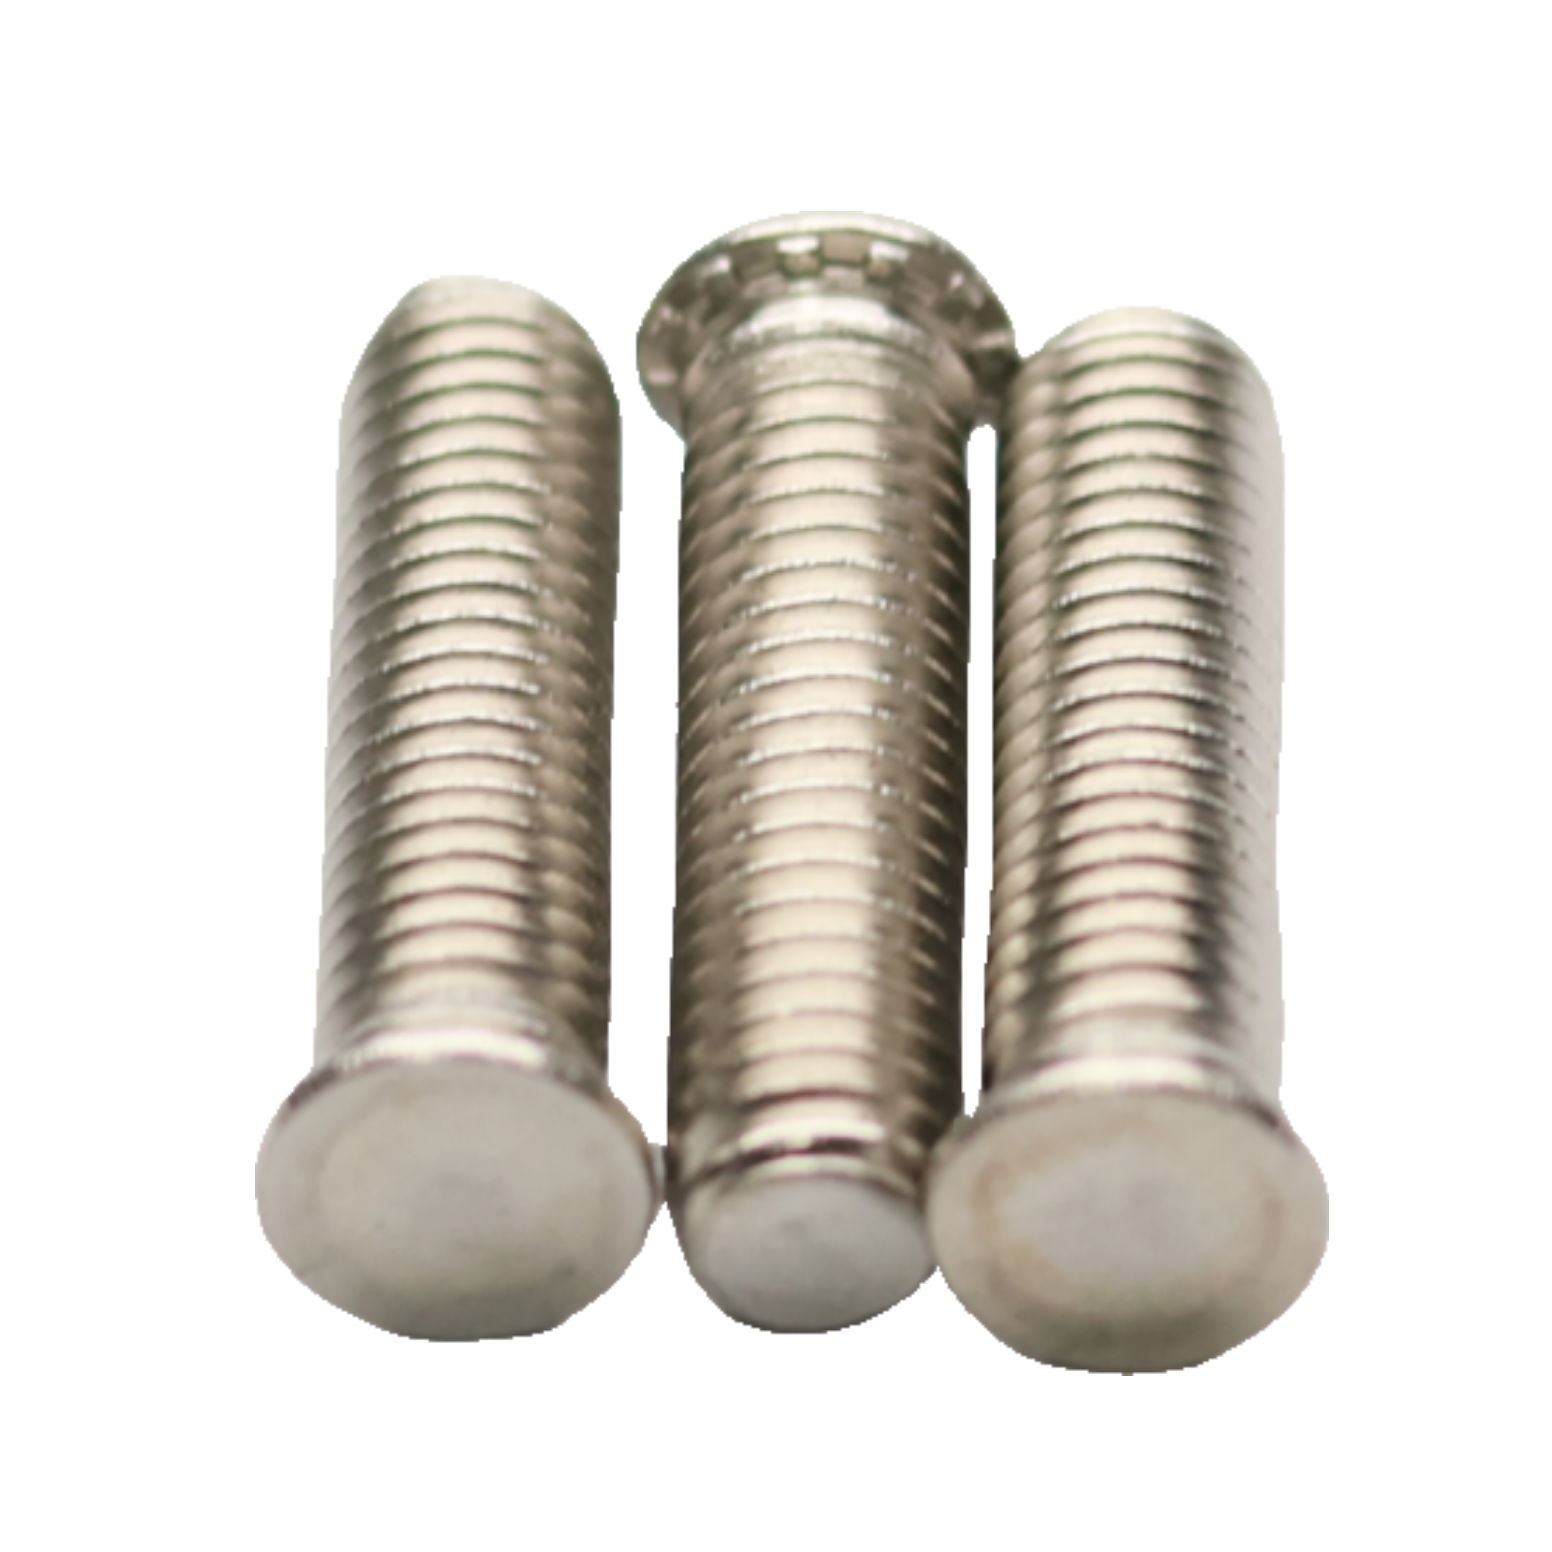 FH4-M6-15Self-Clinching Studs Stainless416 Hardening Use On SUS 304 Sheets 5